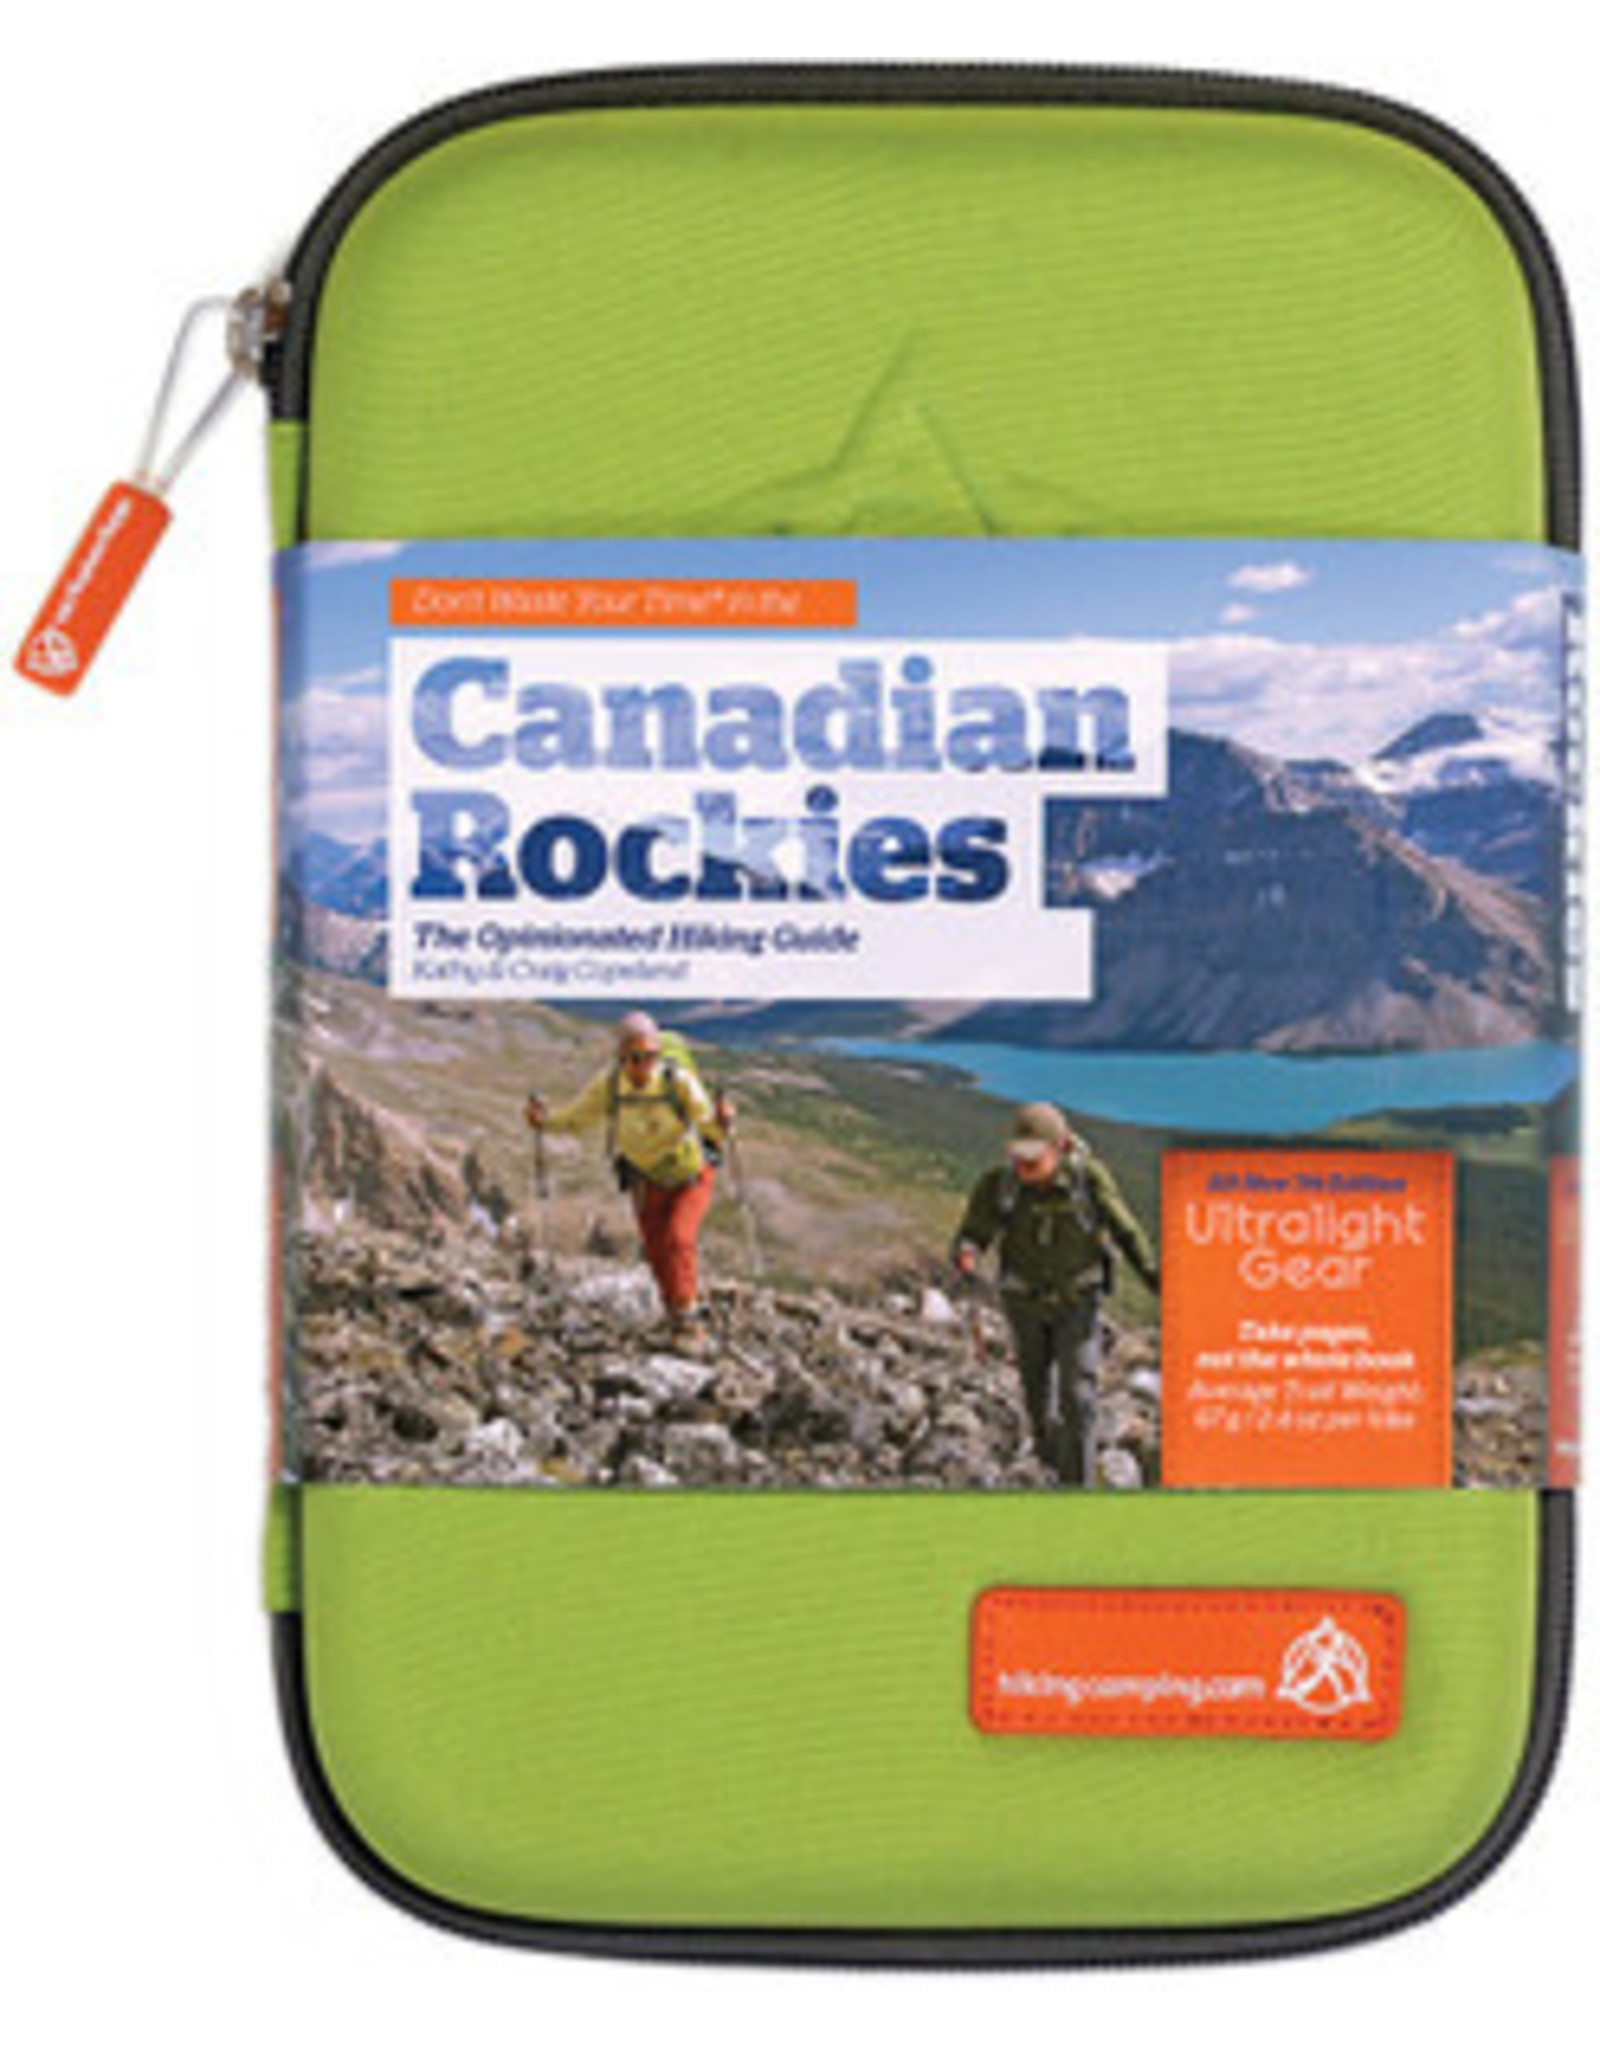 BOOK DONT WASTE YOUR TIME IN THE CANADIAN ROCKIES